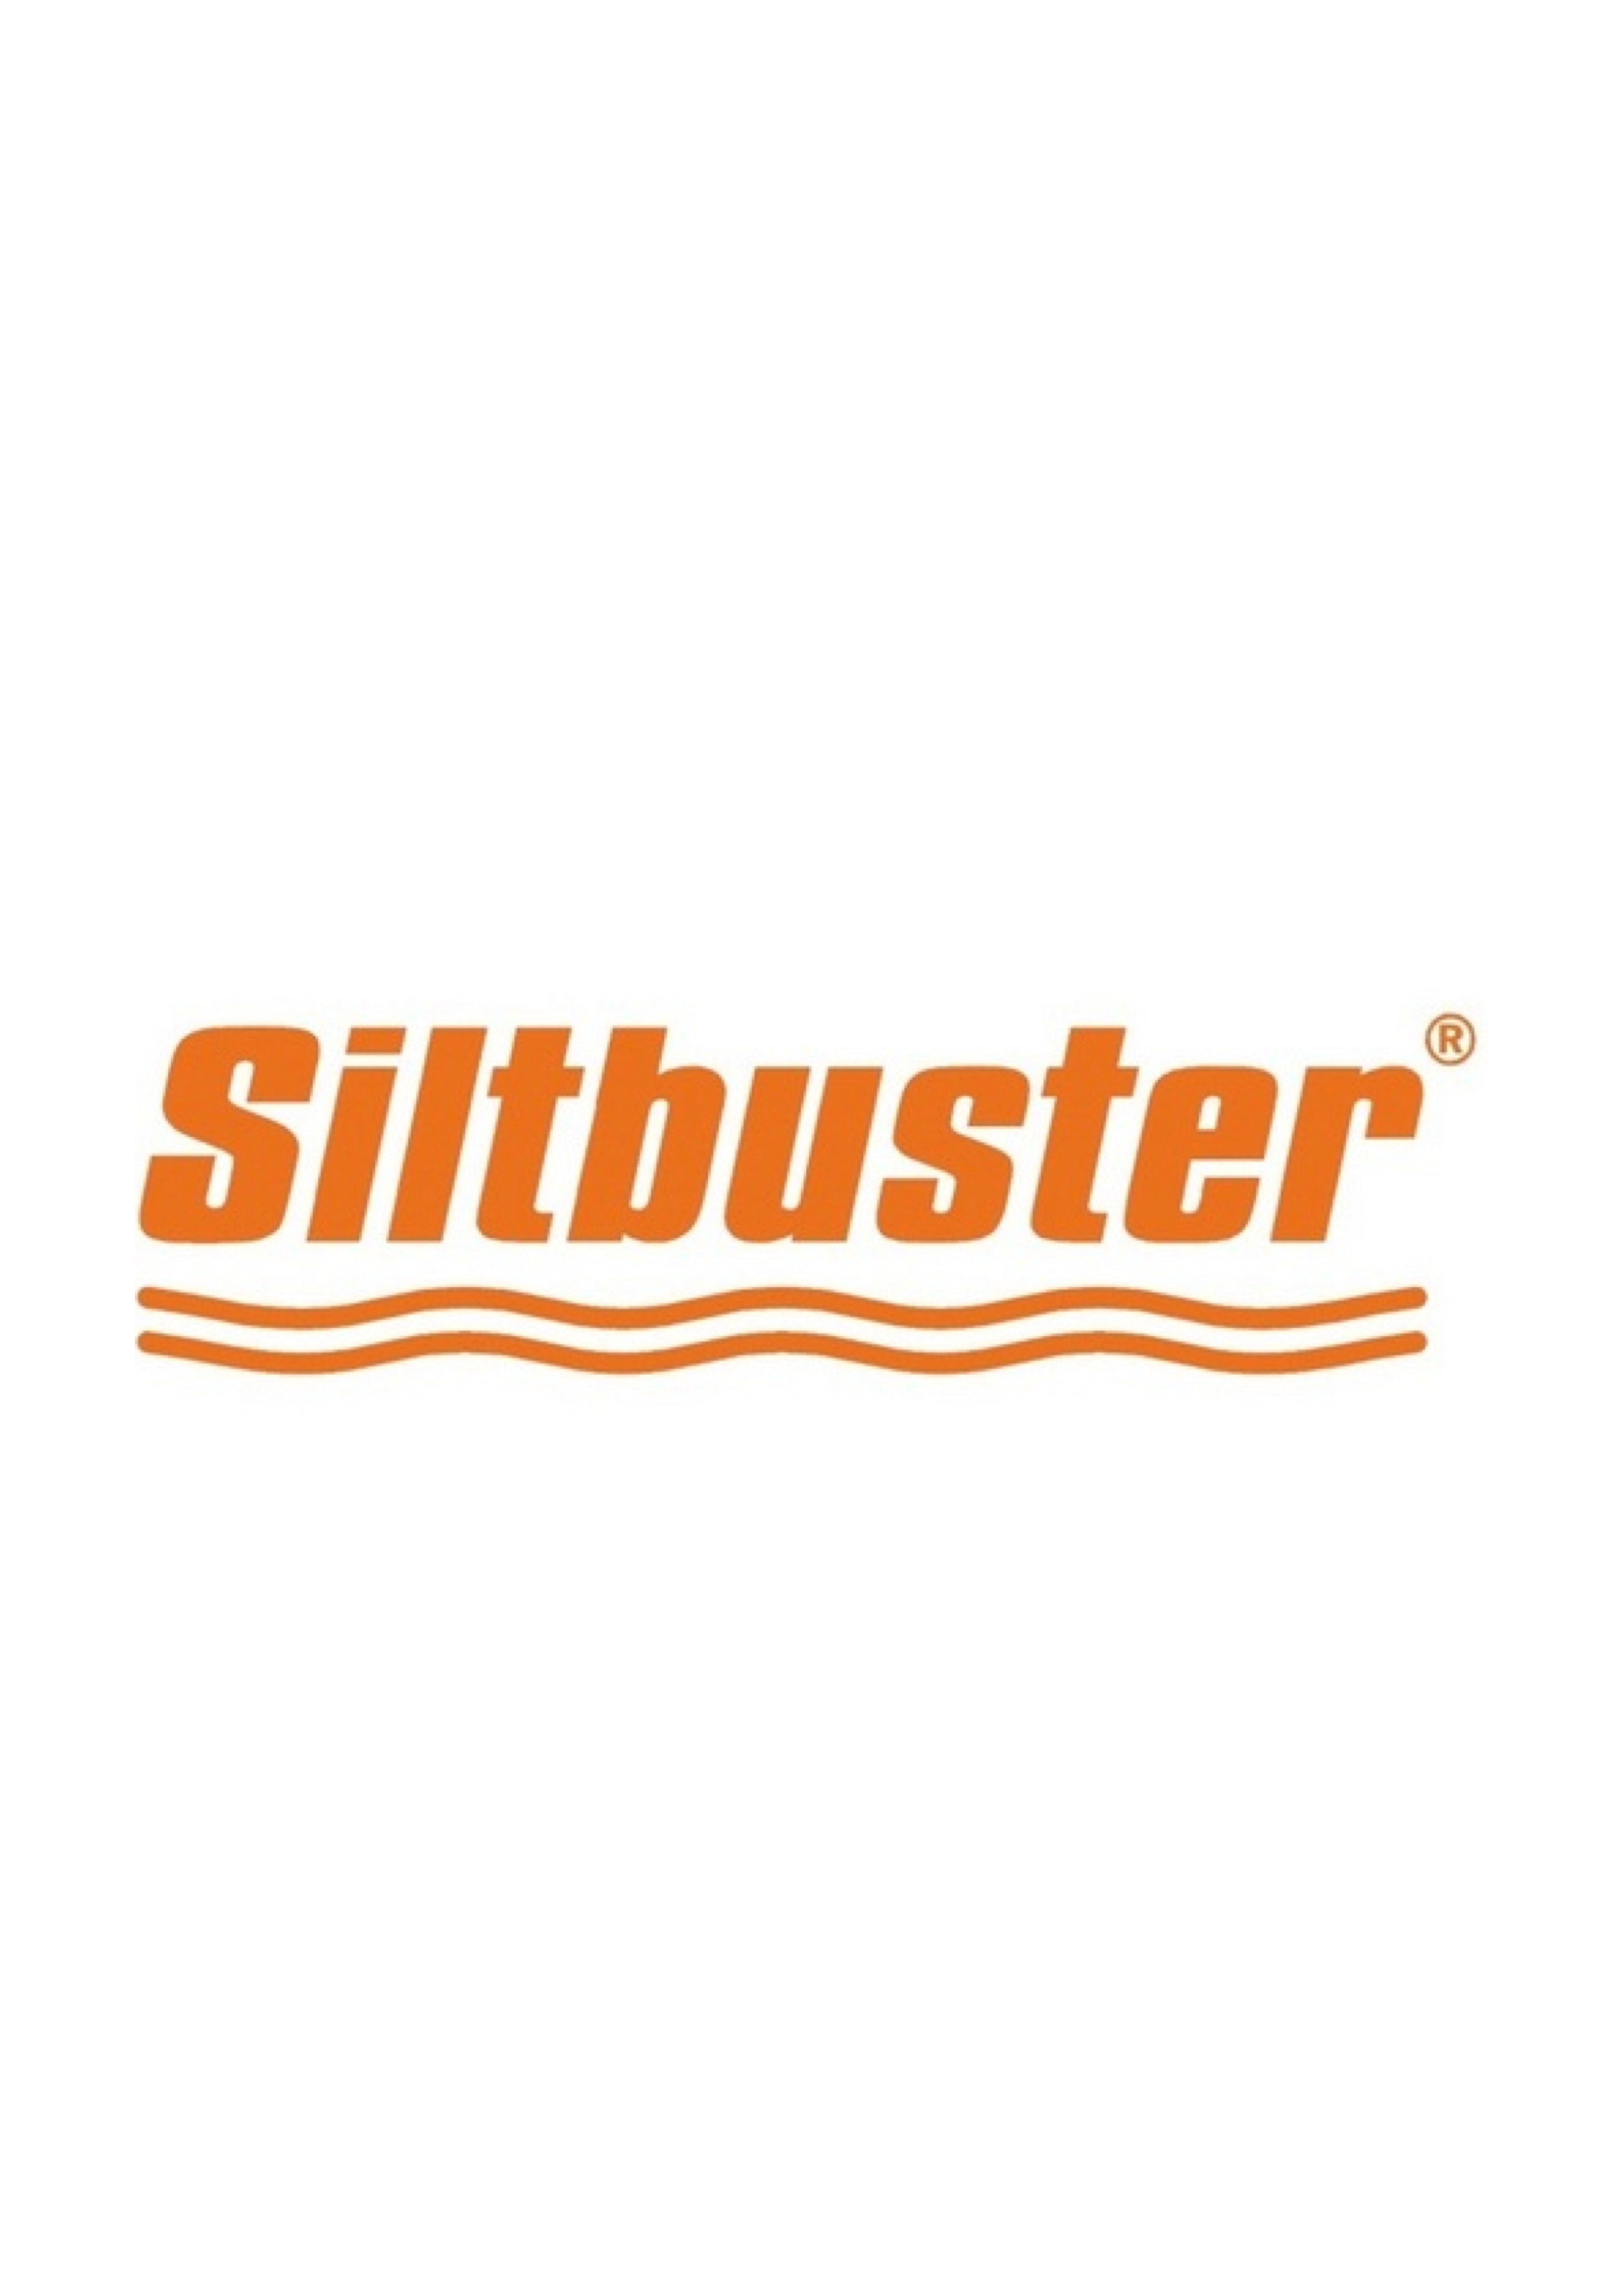 Siltbuster